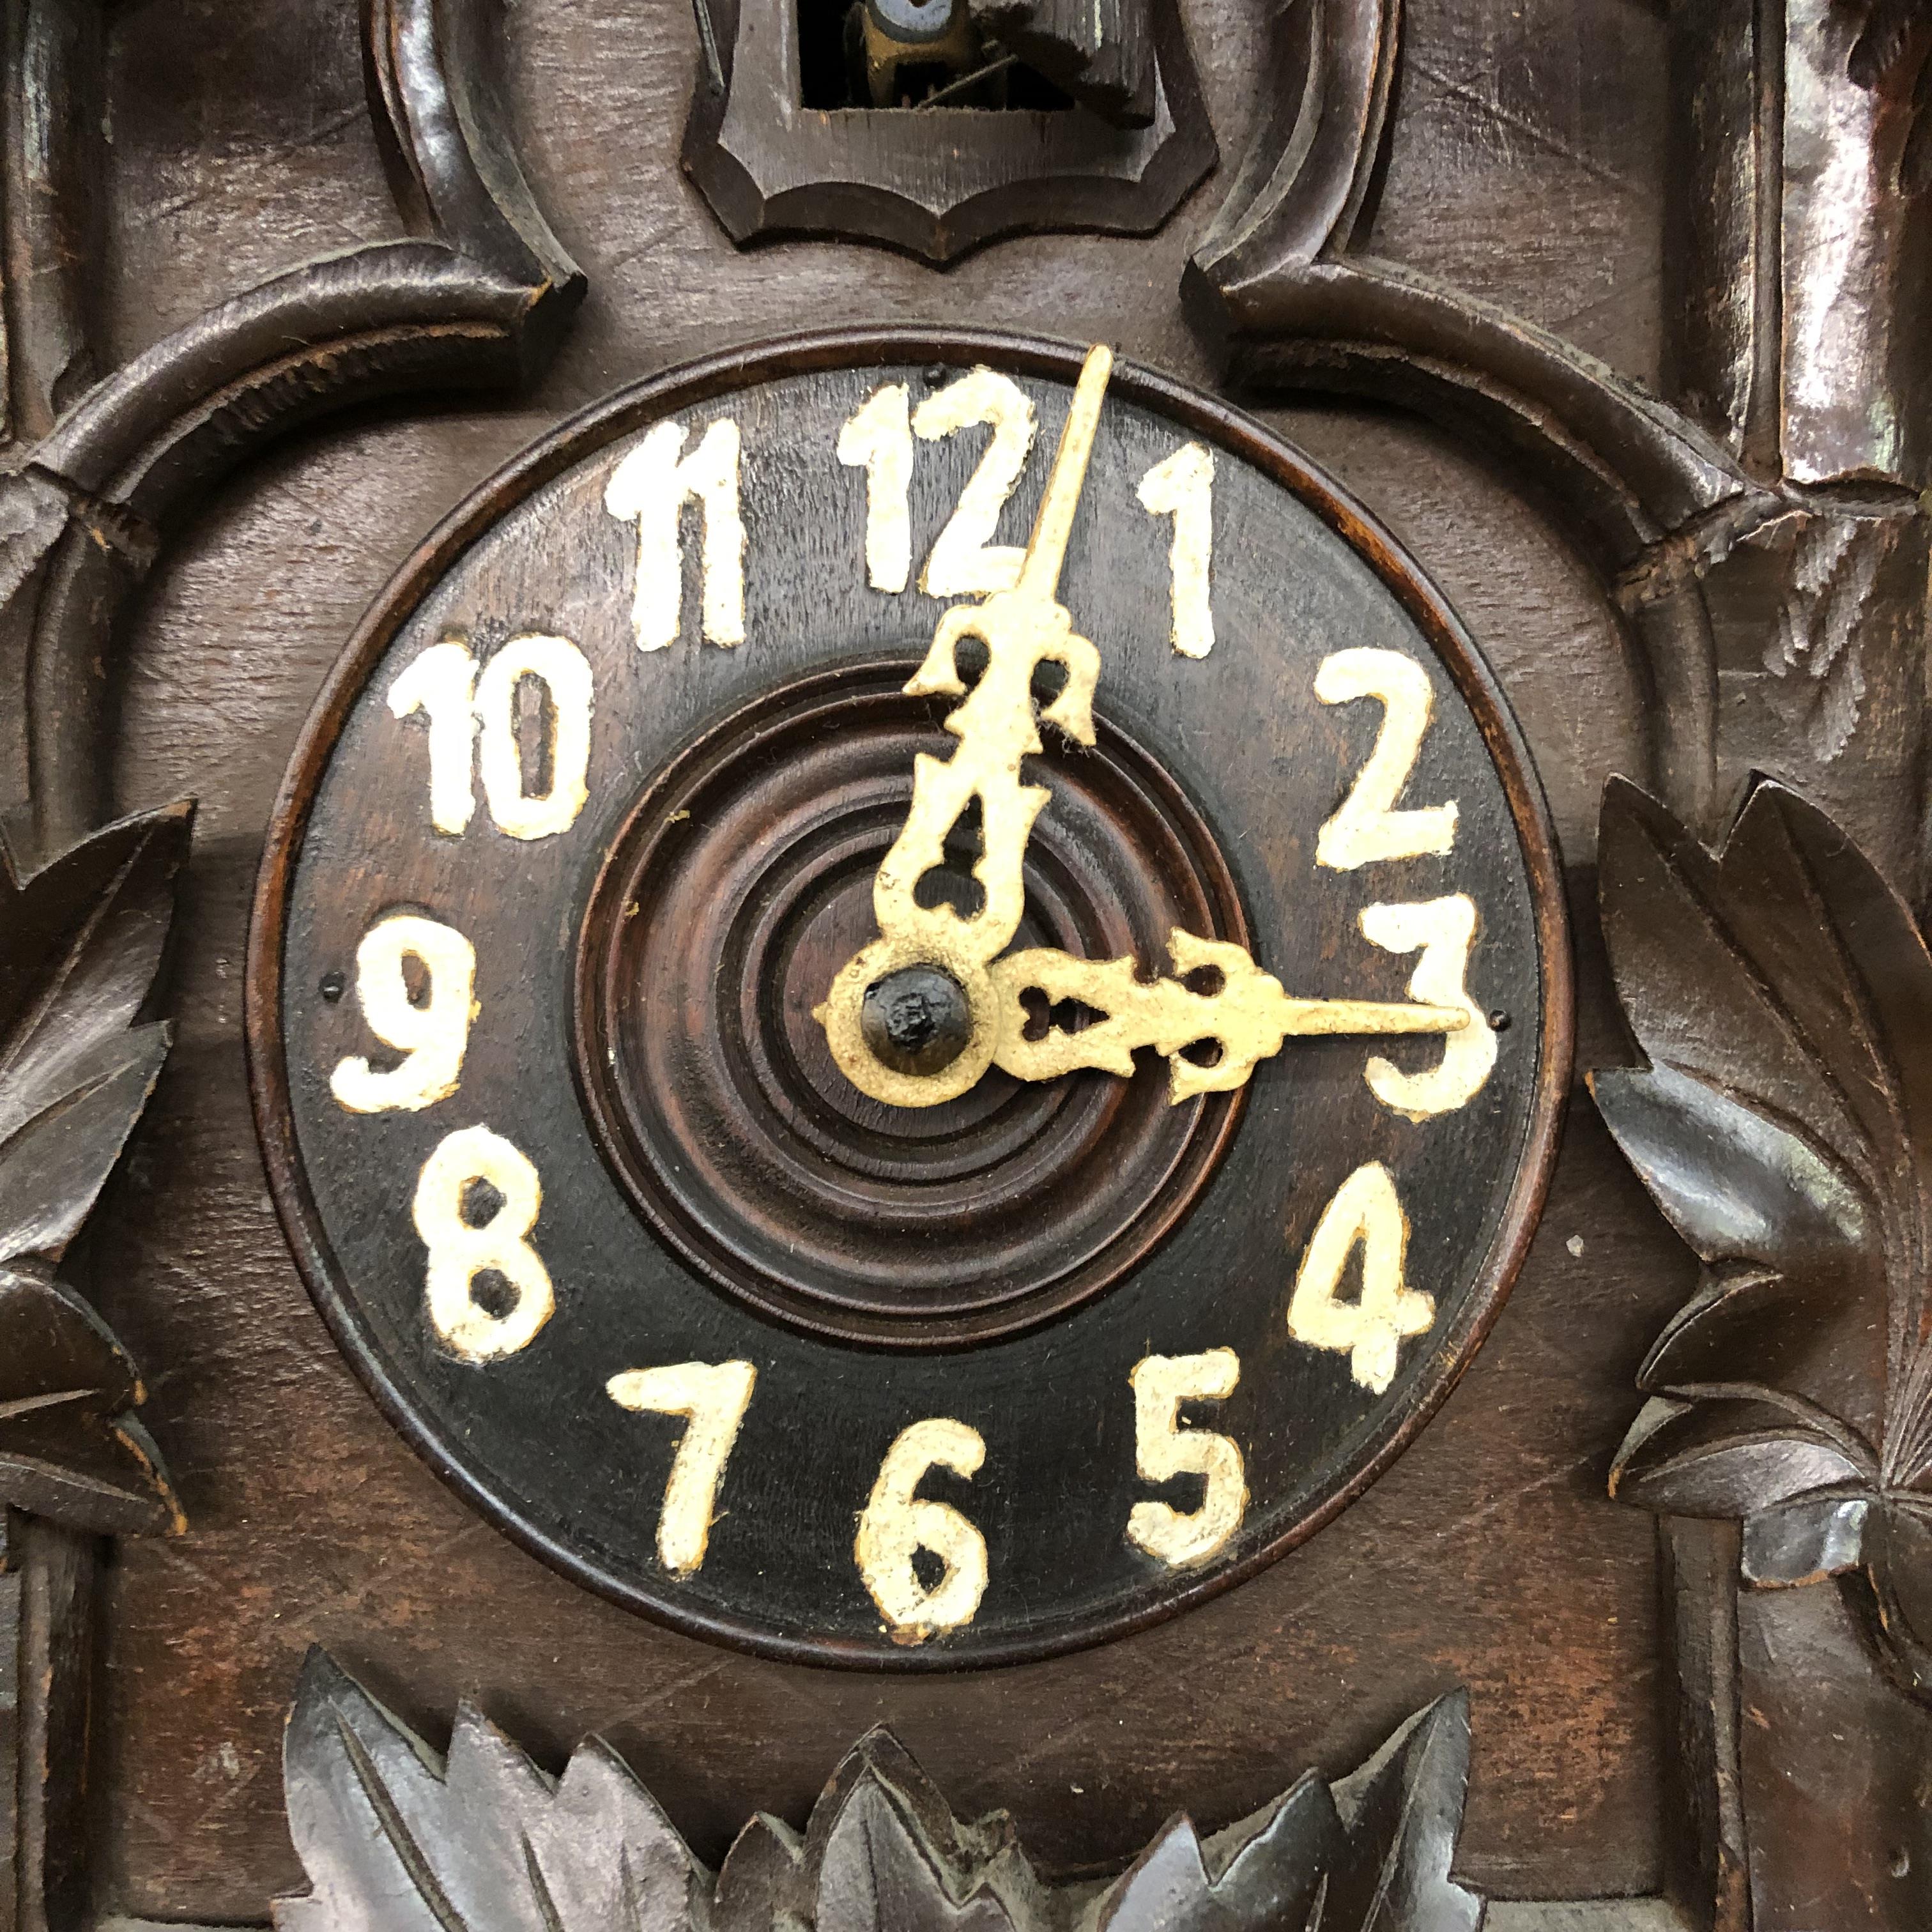 LATE 19TH CENTURY/EARLY 20TH CENTURY BAVARIAN CARVED CUCKOO CLOCK, - Image 3 of 5